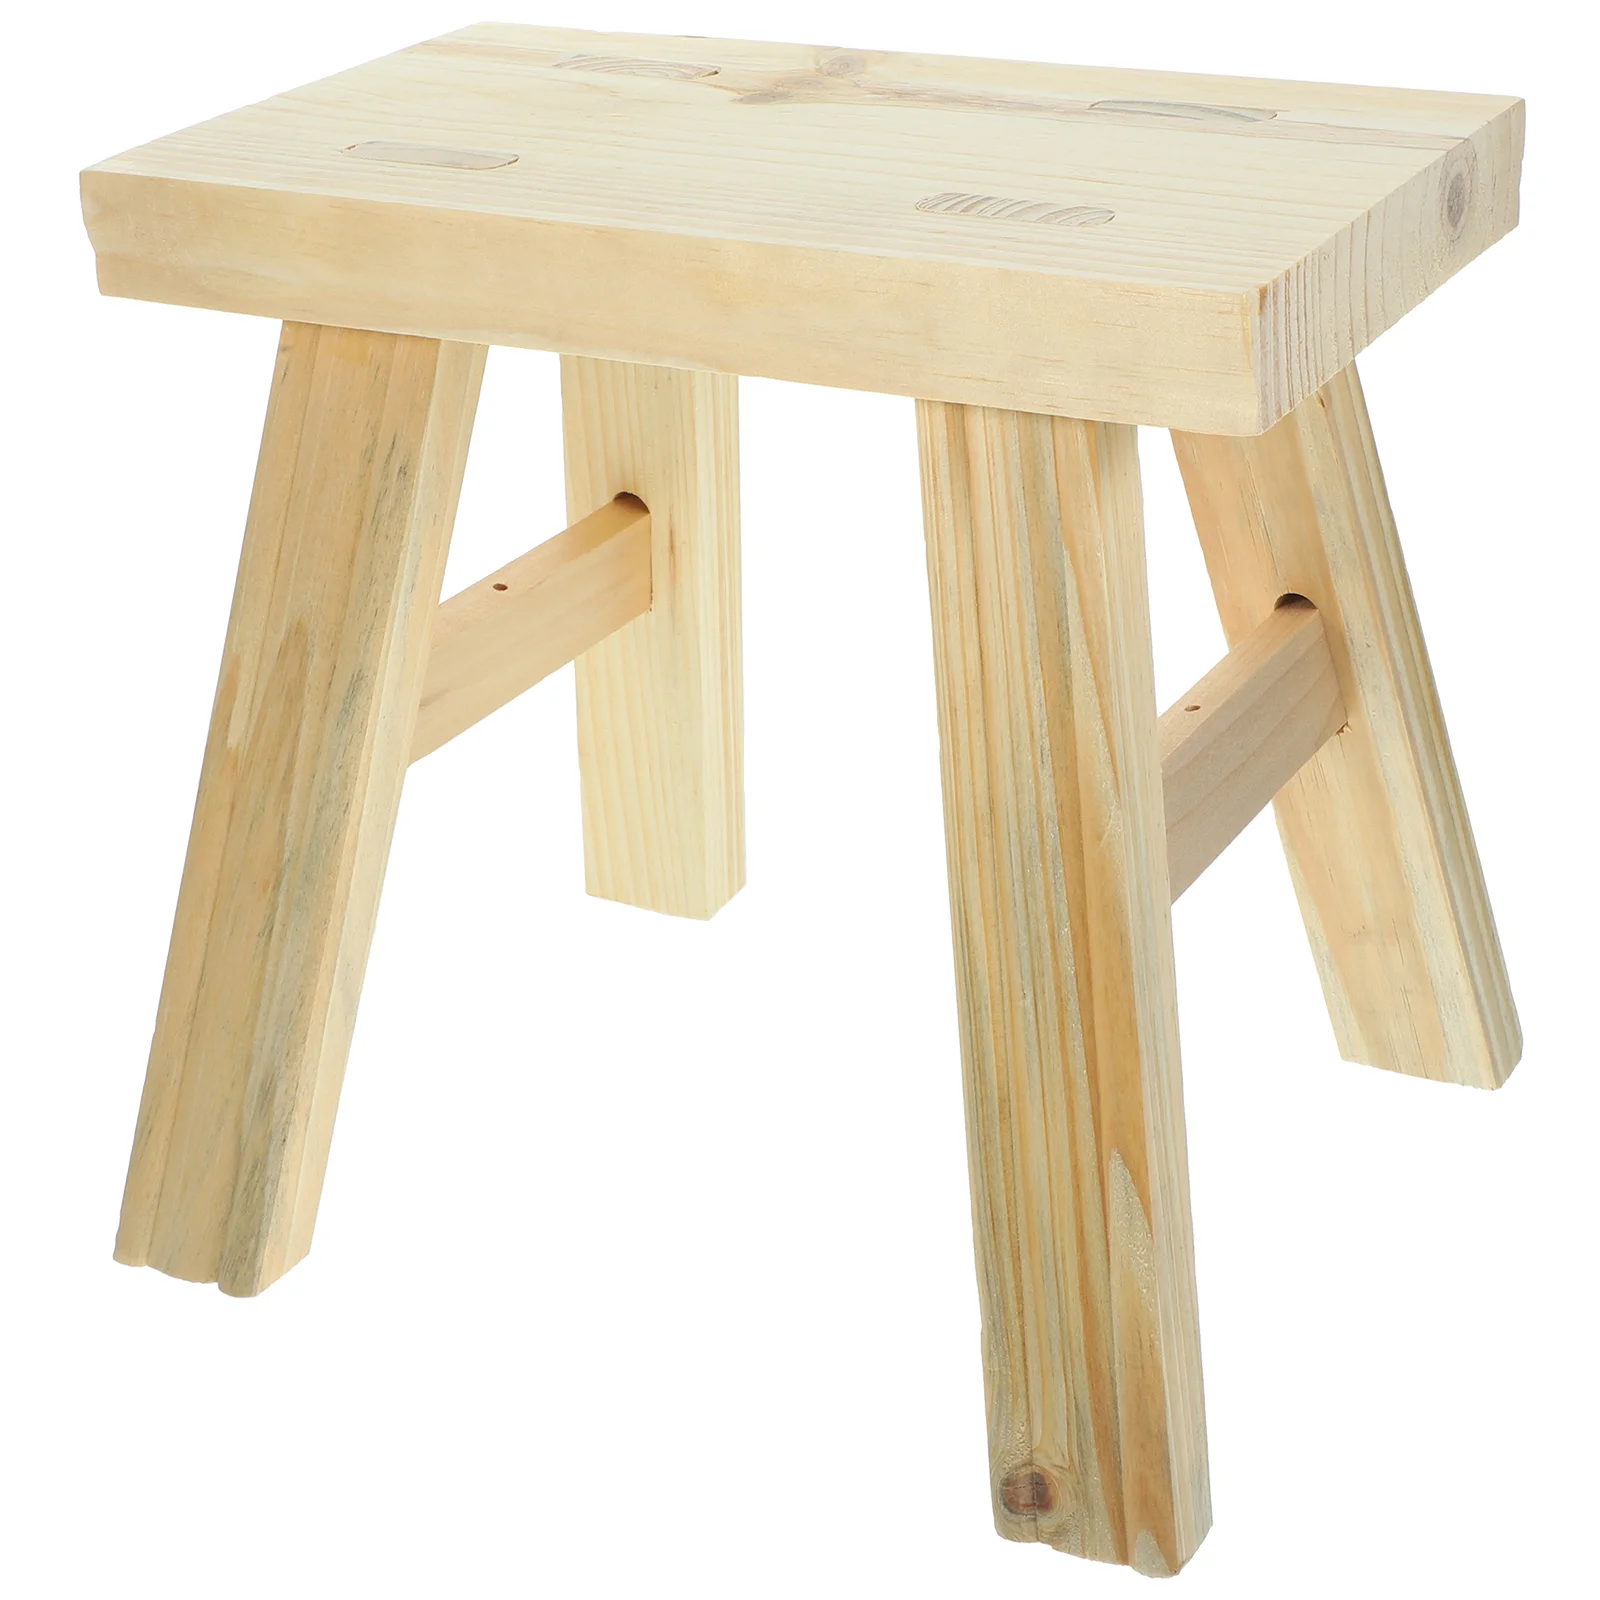 Footrest Wooden Stool Kid Bathing Practical Children Stepping Small Dancing Kids